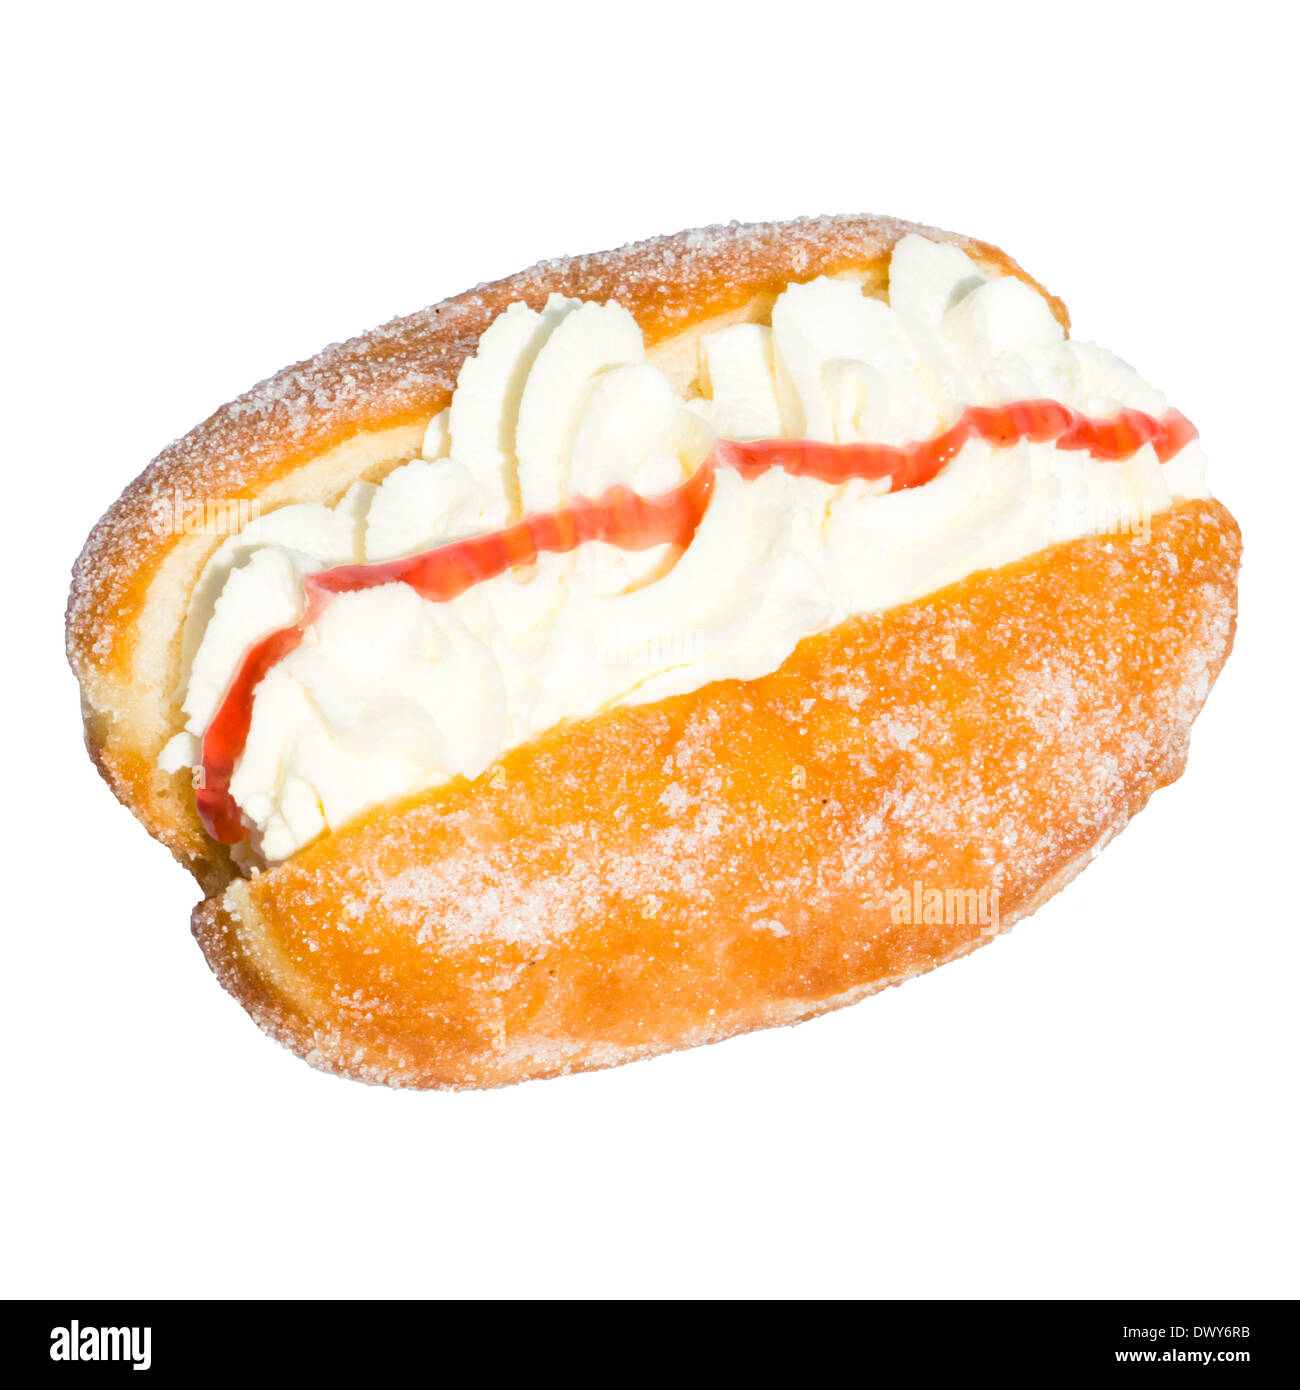 Donut with cream & jam isolated on a white background. Stock Photo